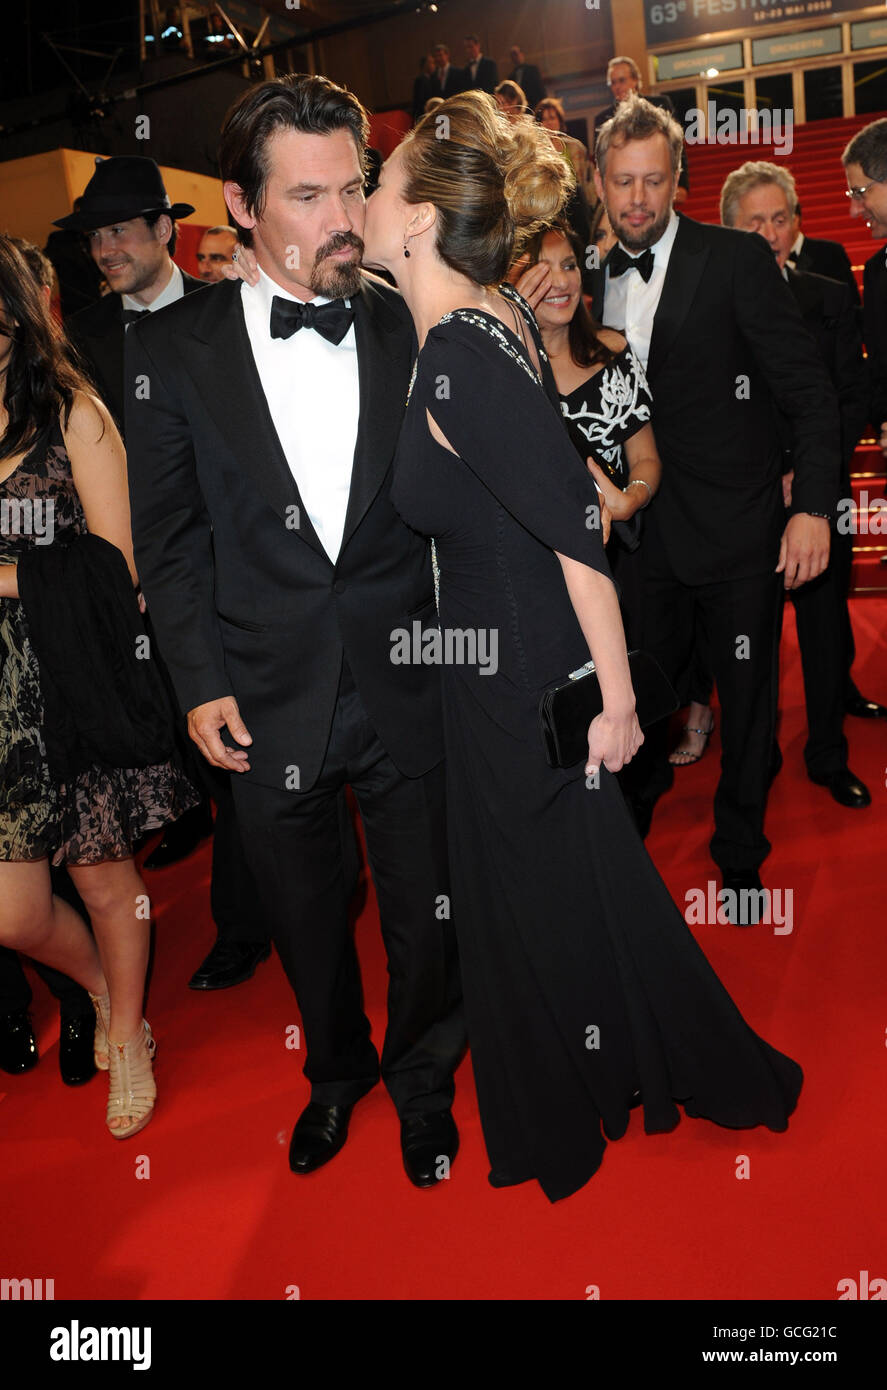 Josh Brolin receives a kiss from Diane Lane as they depart after the screening of Wall Street: Money Never Sleeps at the Grand Auditorium Lumiere during the Cannes Film Festival, France. Stock Photo